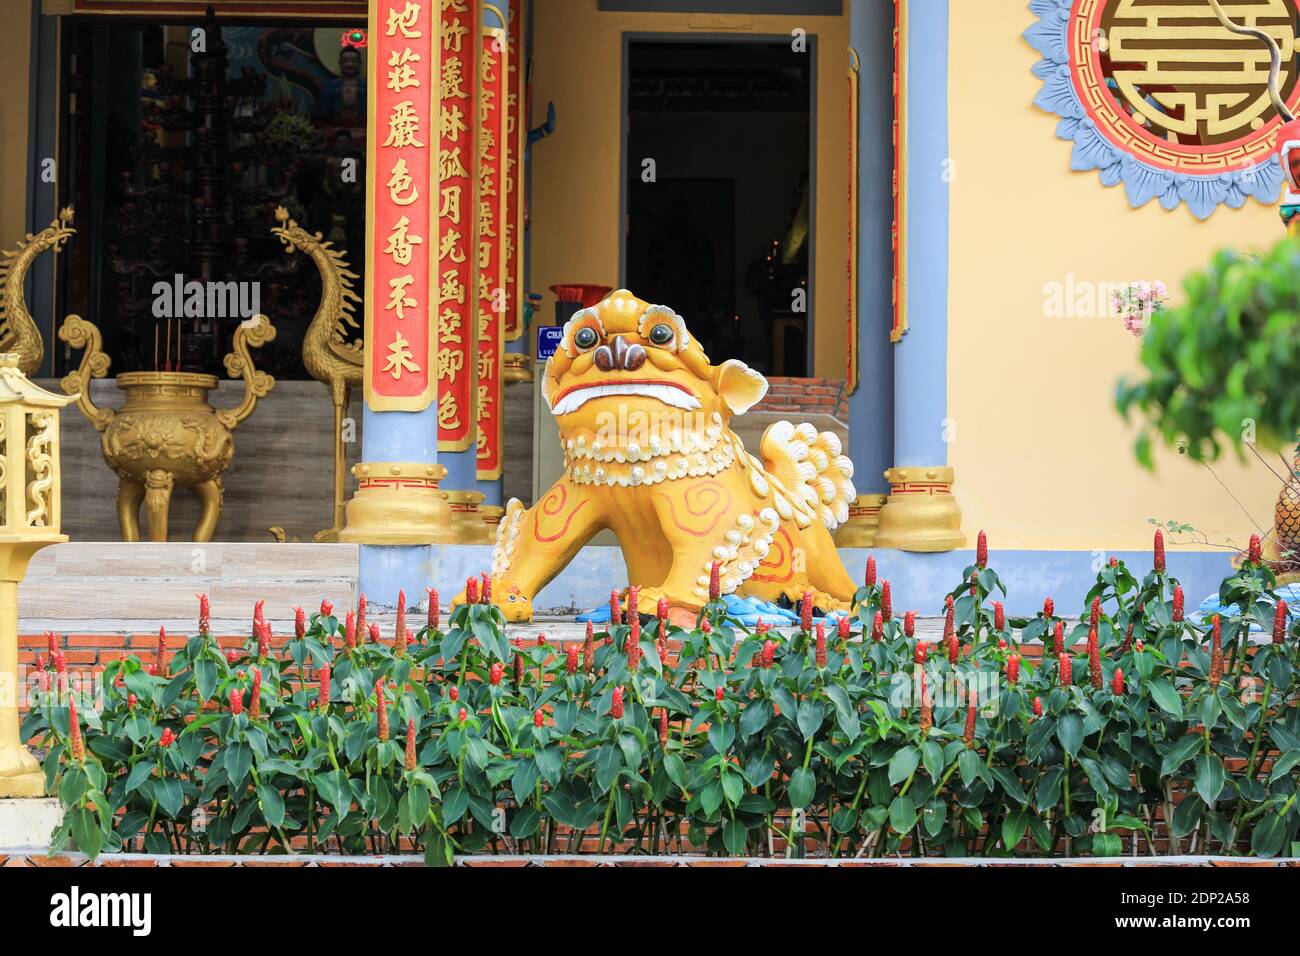 Mythical creature at Sung Hung Pagoda (Sung Hung Co Tu), Tran Hung Dao street, Duong Dong town, Phu Quoc district, Kien Giang province, Vietnam, Asia Stock Photo